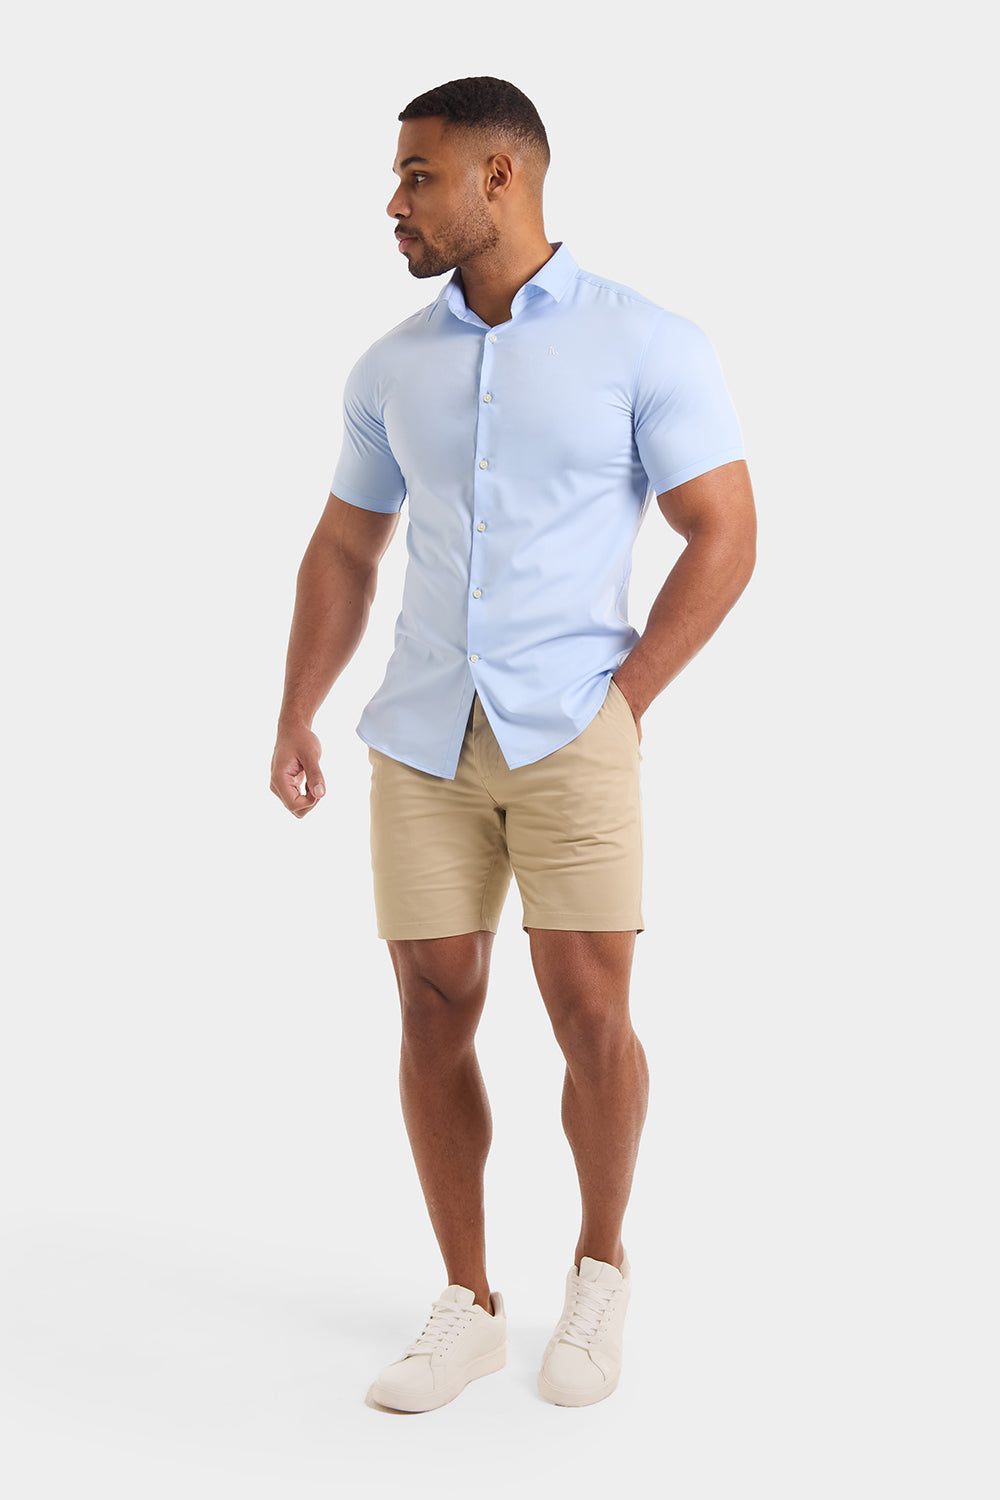 Muscle Fit Chino Shorts in Stone - TAILORED ATHLETE - ROW